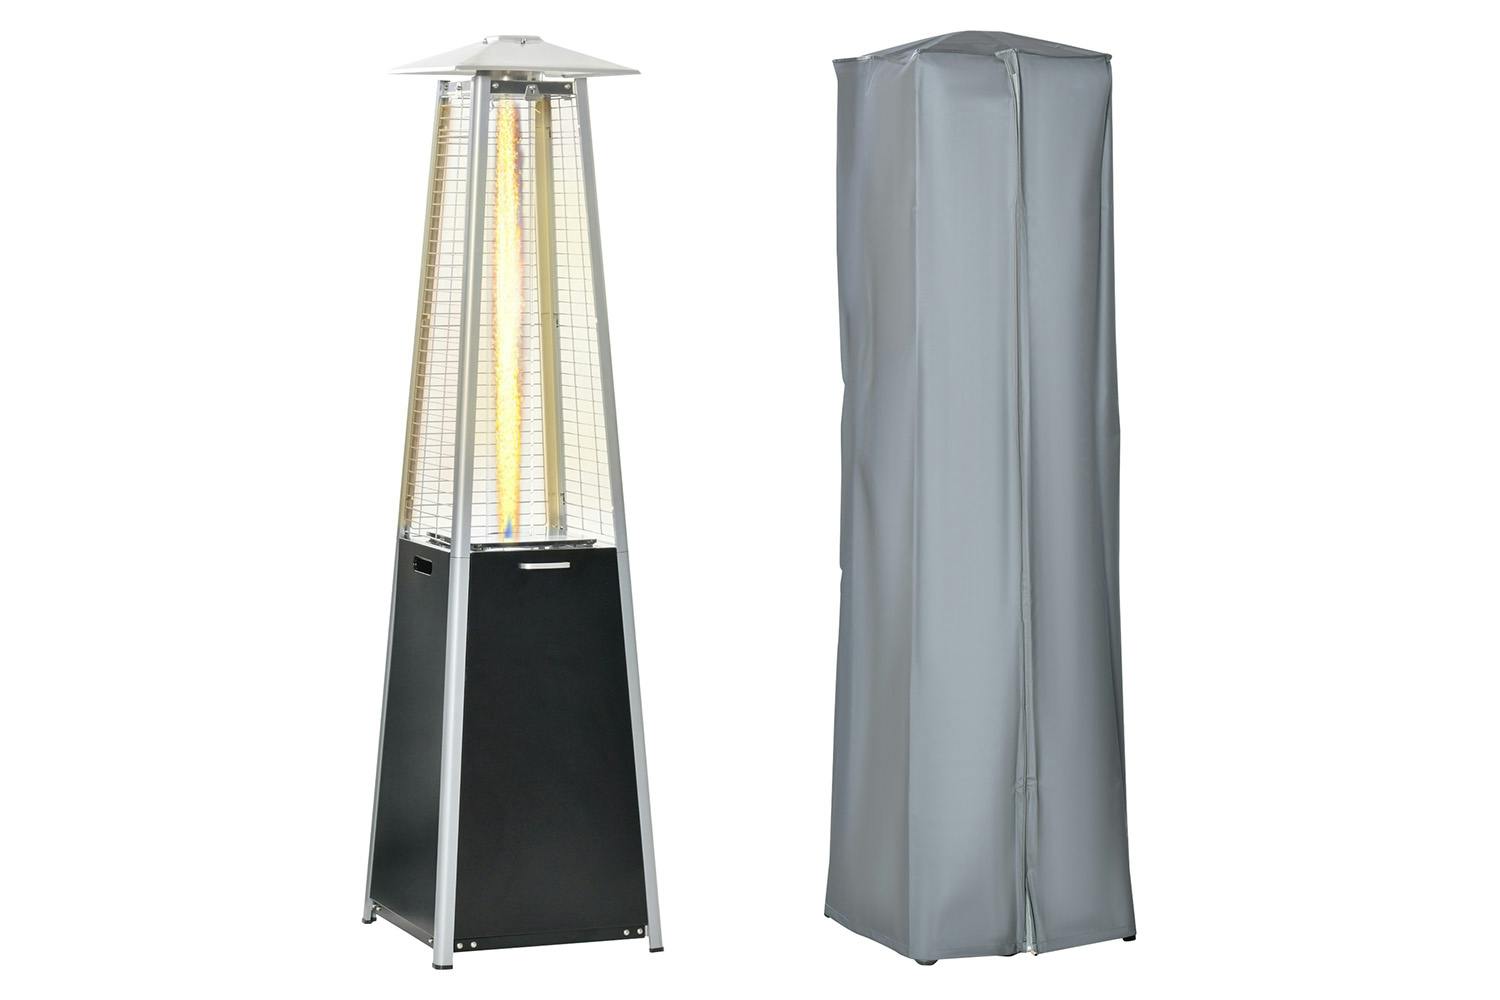 Outsunny Outdoor Freestanding Patio Heaters | Black